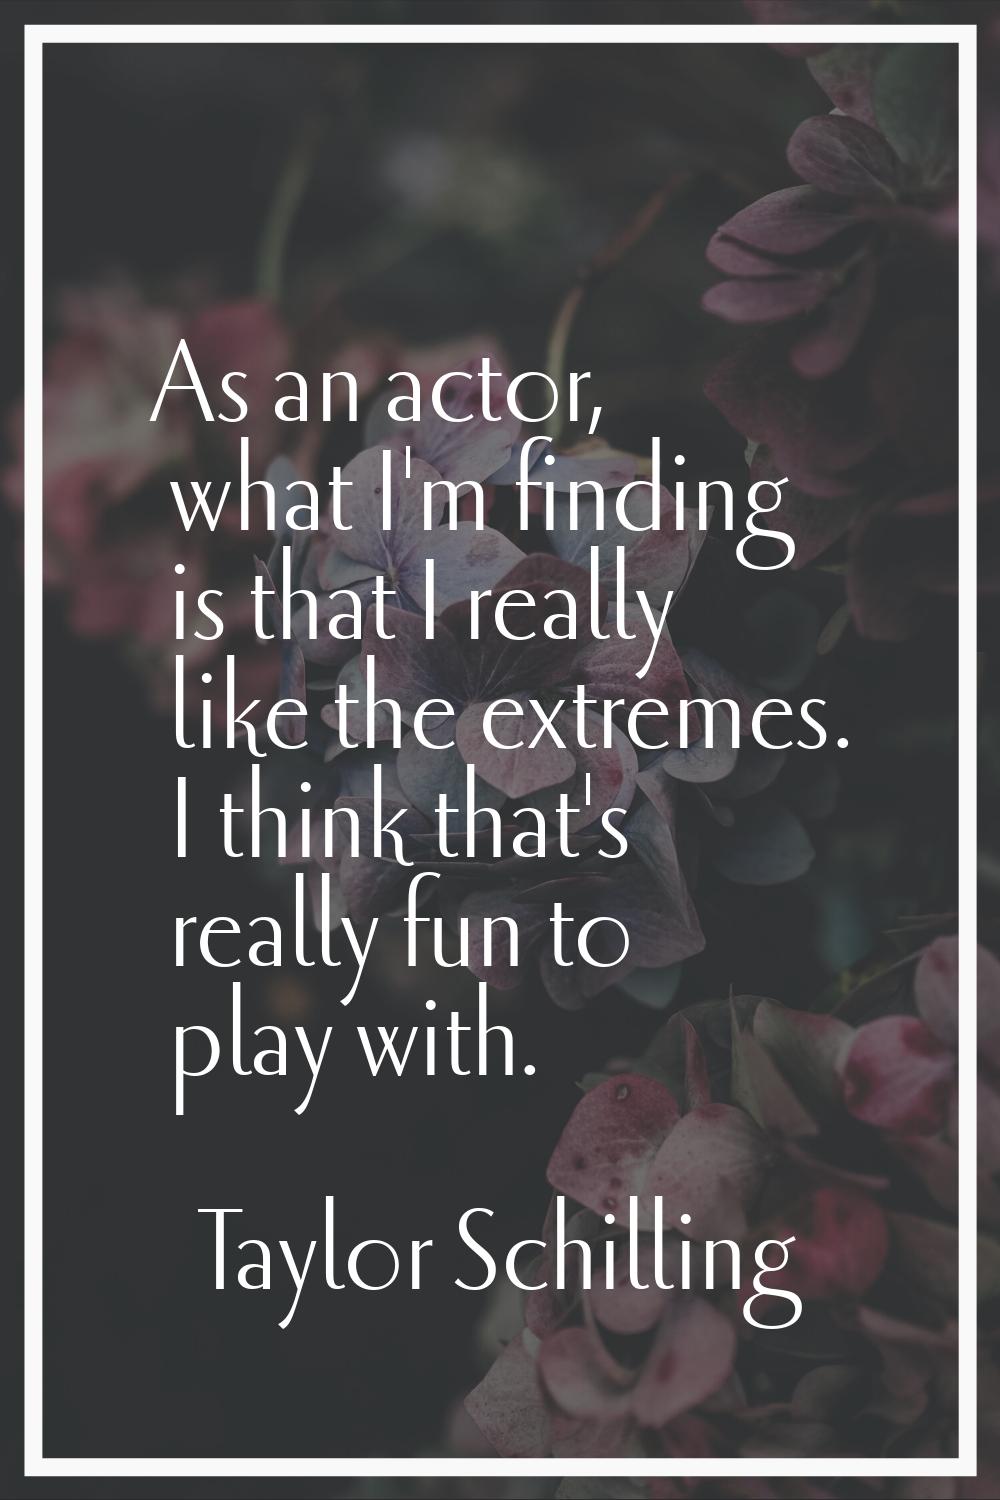 As an actor, what I'm finding is that I really like the extremes. I think that's really fun to play